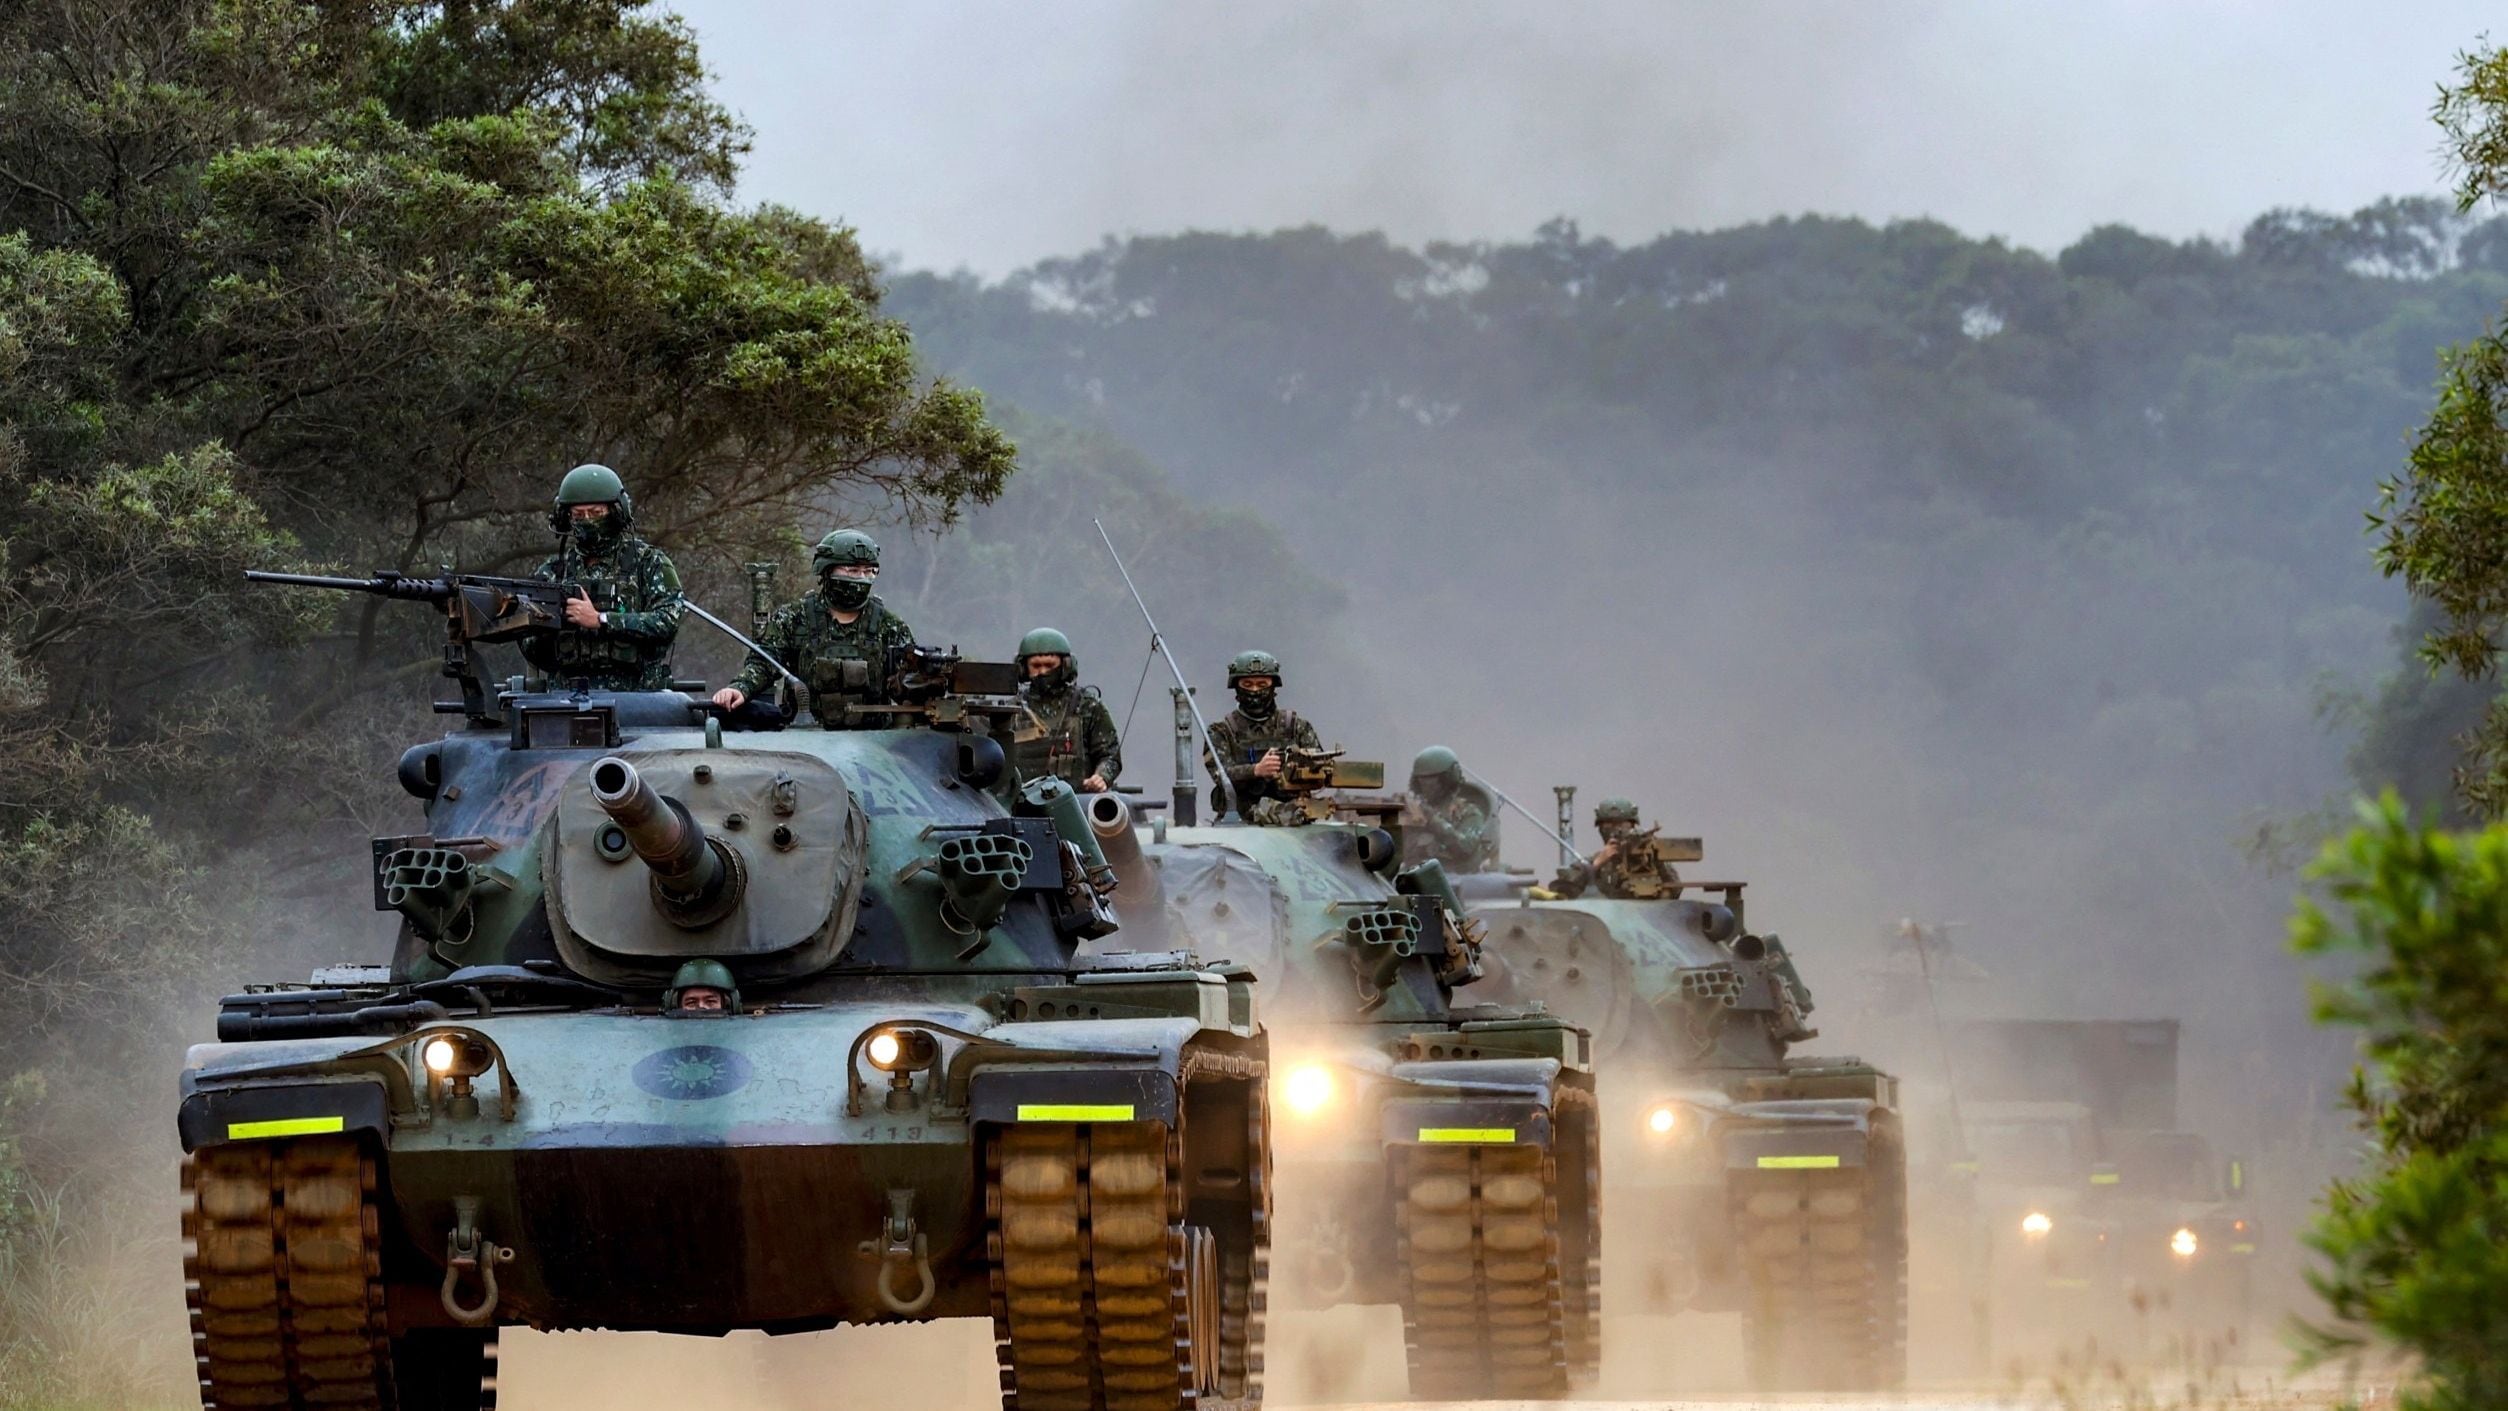 Soldiers of Taiwanese Army take part in a military exercise at an undisclosed location in Taiwan in this handout picture provided by Taiwan Defence Ministry and released on April 9, 2023. Taiwan Defence Ministry/Handout via REUTERS ATTENTION EDITORS - THIS IMAGE WAS PROVIDED BY A THIRD PARTY. NO RESALES. NO ARCHIVES.